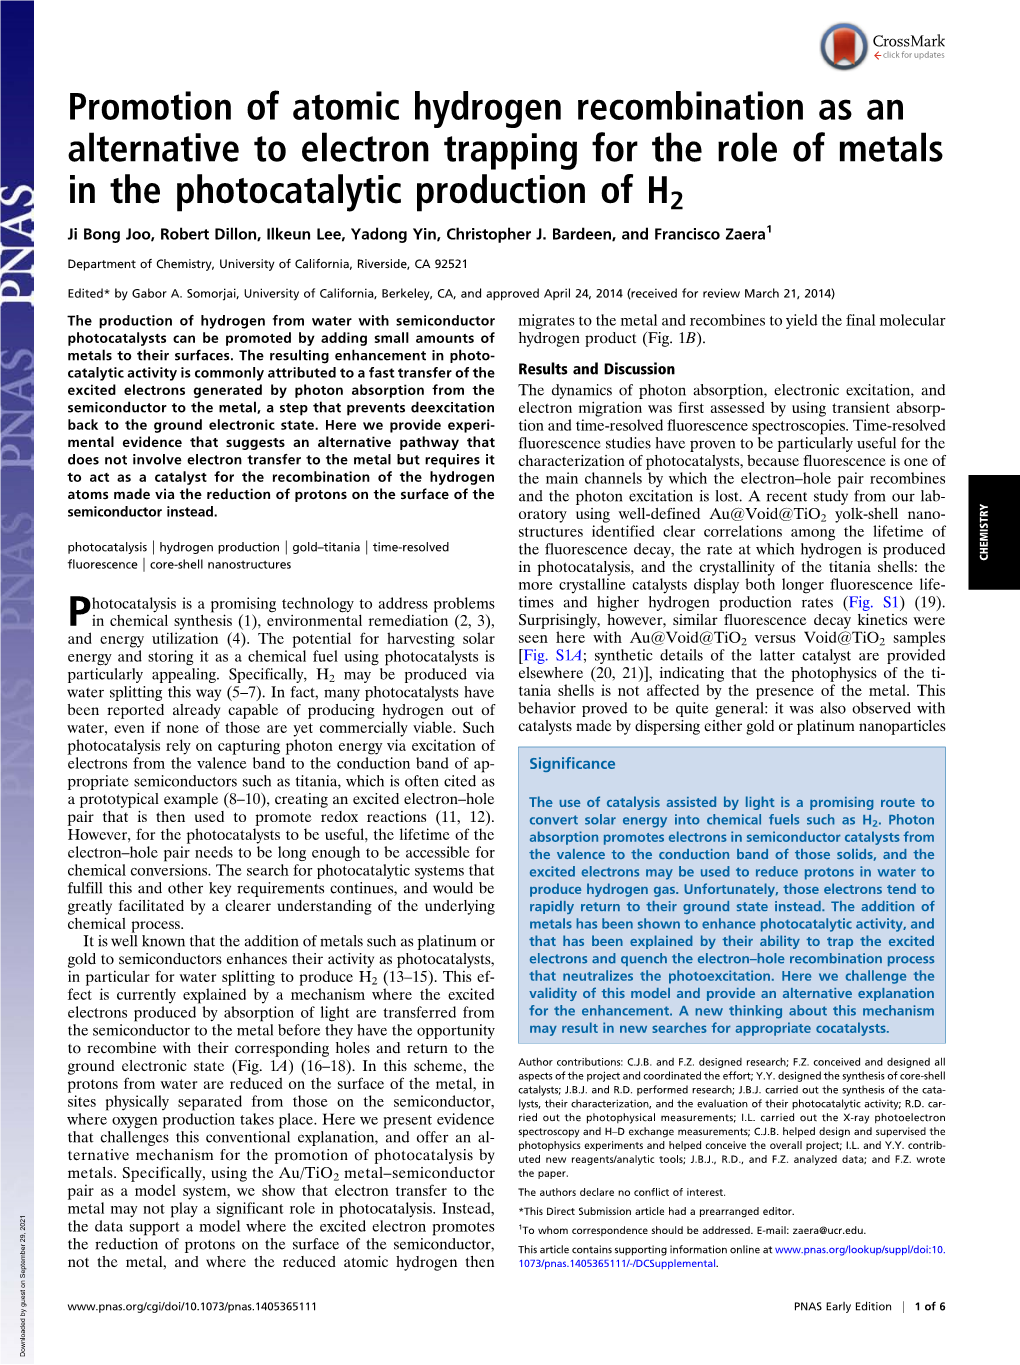 Promotion of Atomic Hydrogen Recombination As an Alternative To